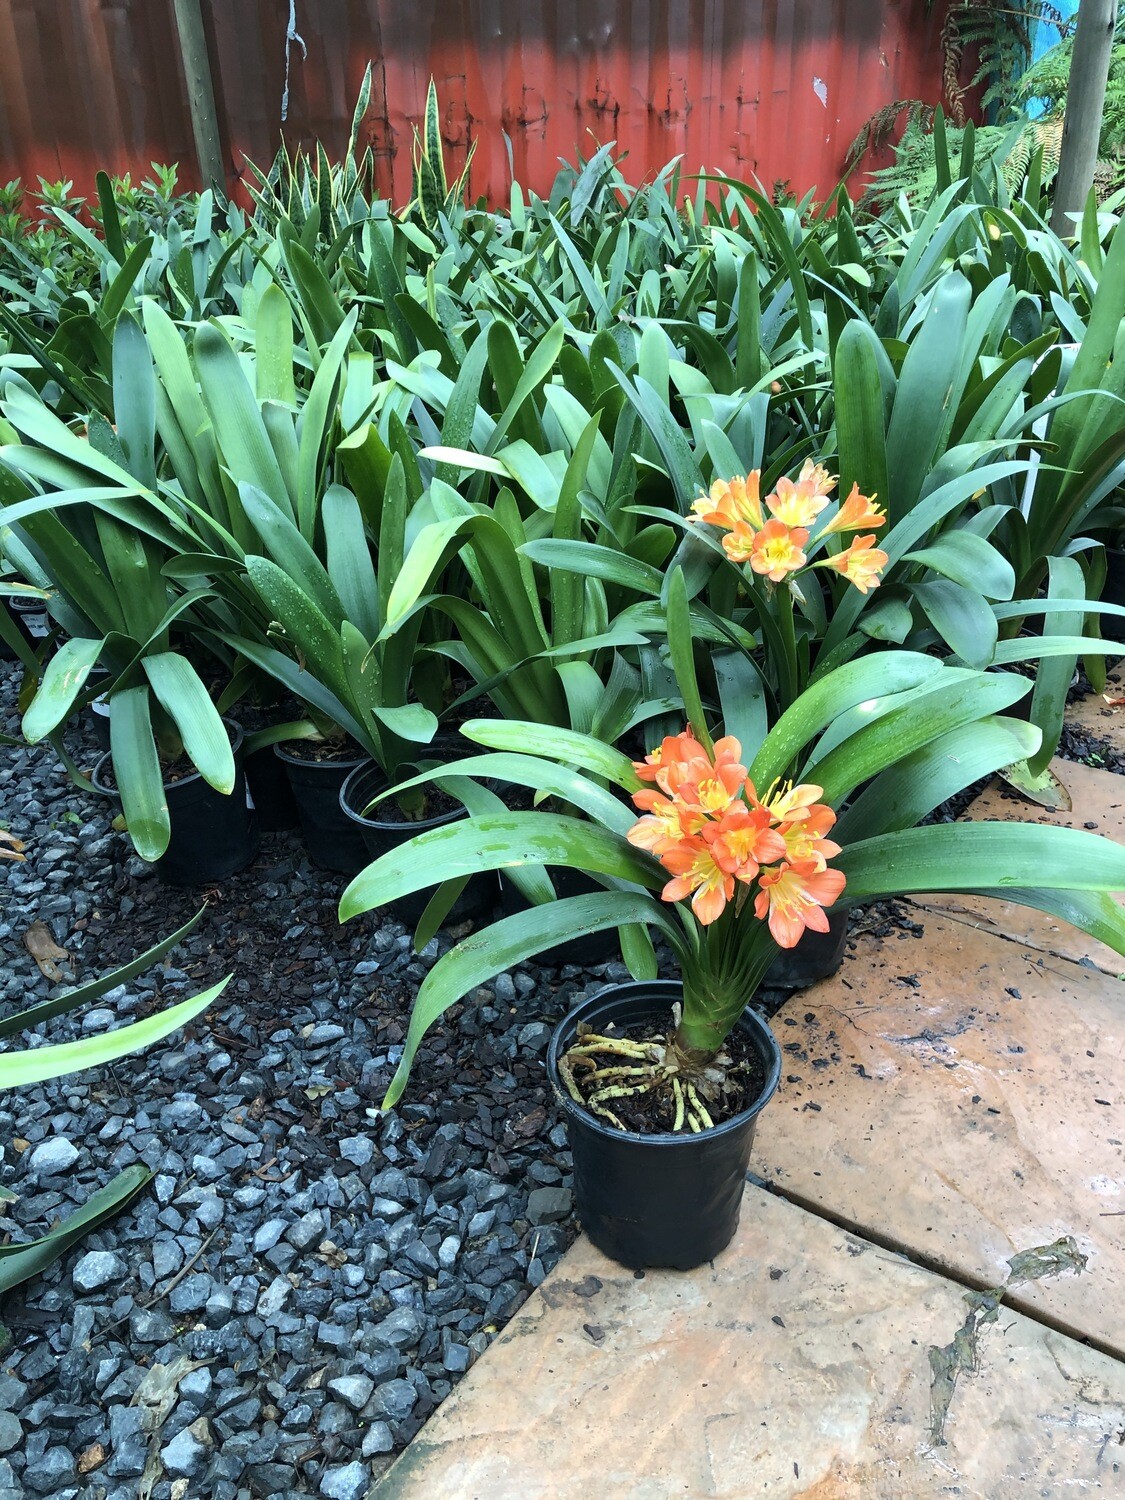 Clivia 17cm pot some in flower. Lovely plants!